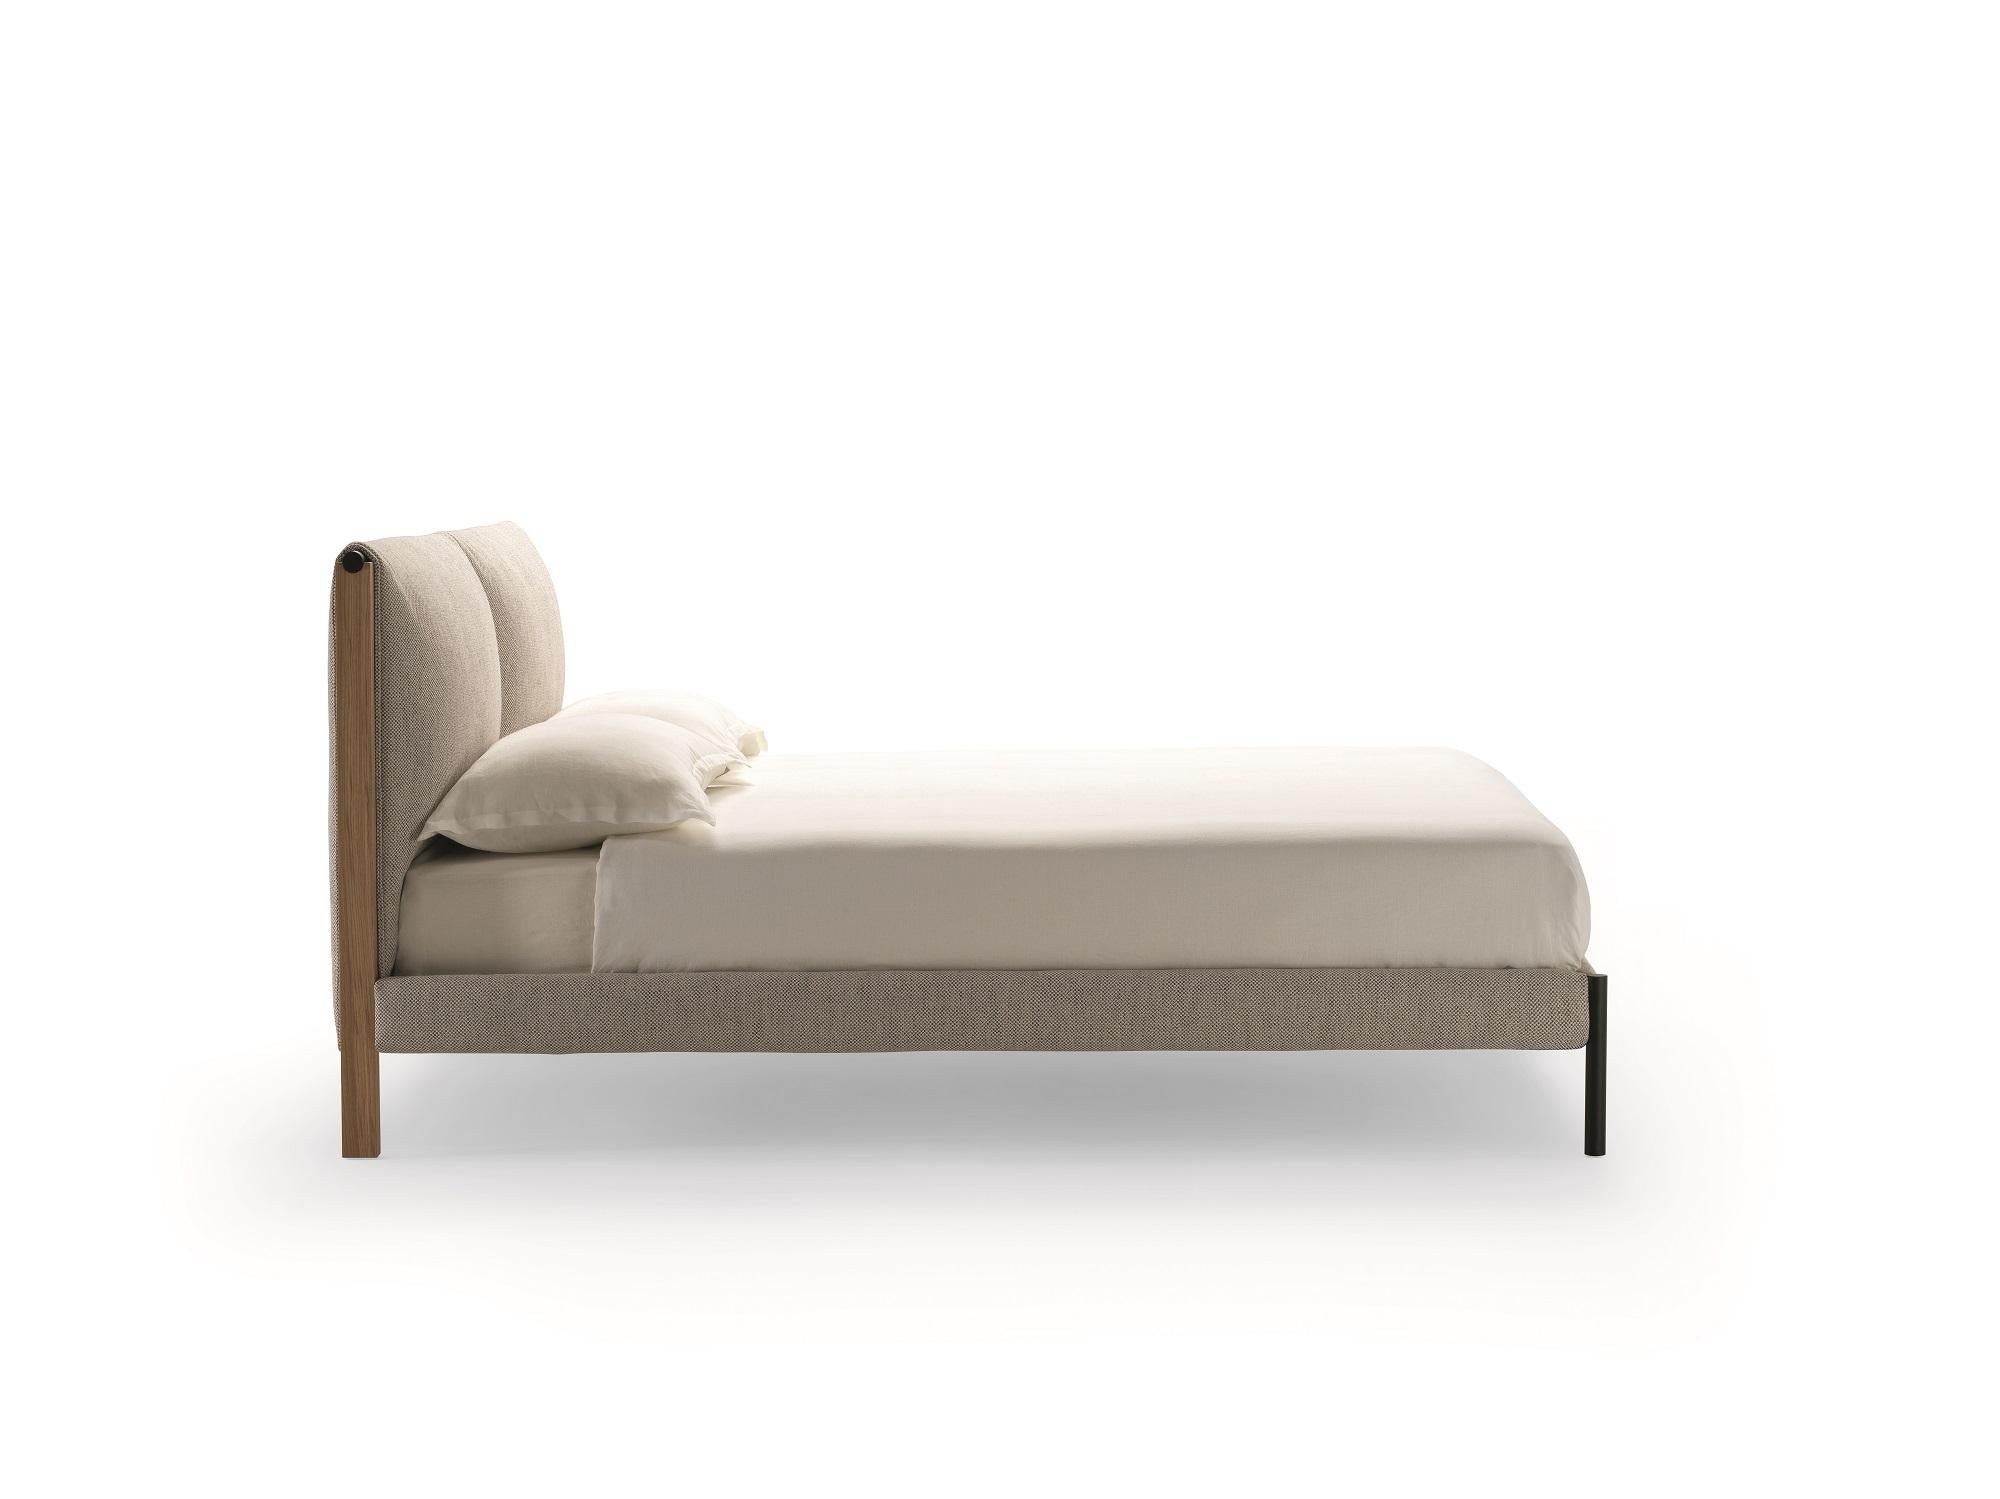 Zanotta Queen Size Ricordi Bed with Separate Springing in Toce Upholstery by Spalvieri & Del Ciotto

Bed with separate springing. Headboard frame in natural or in open pore black painted oak. Upholstery in polyurethane/heat-bound polyester fibre.